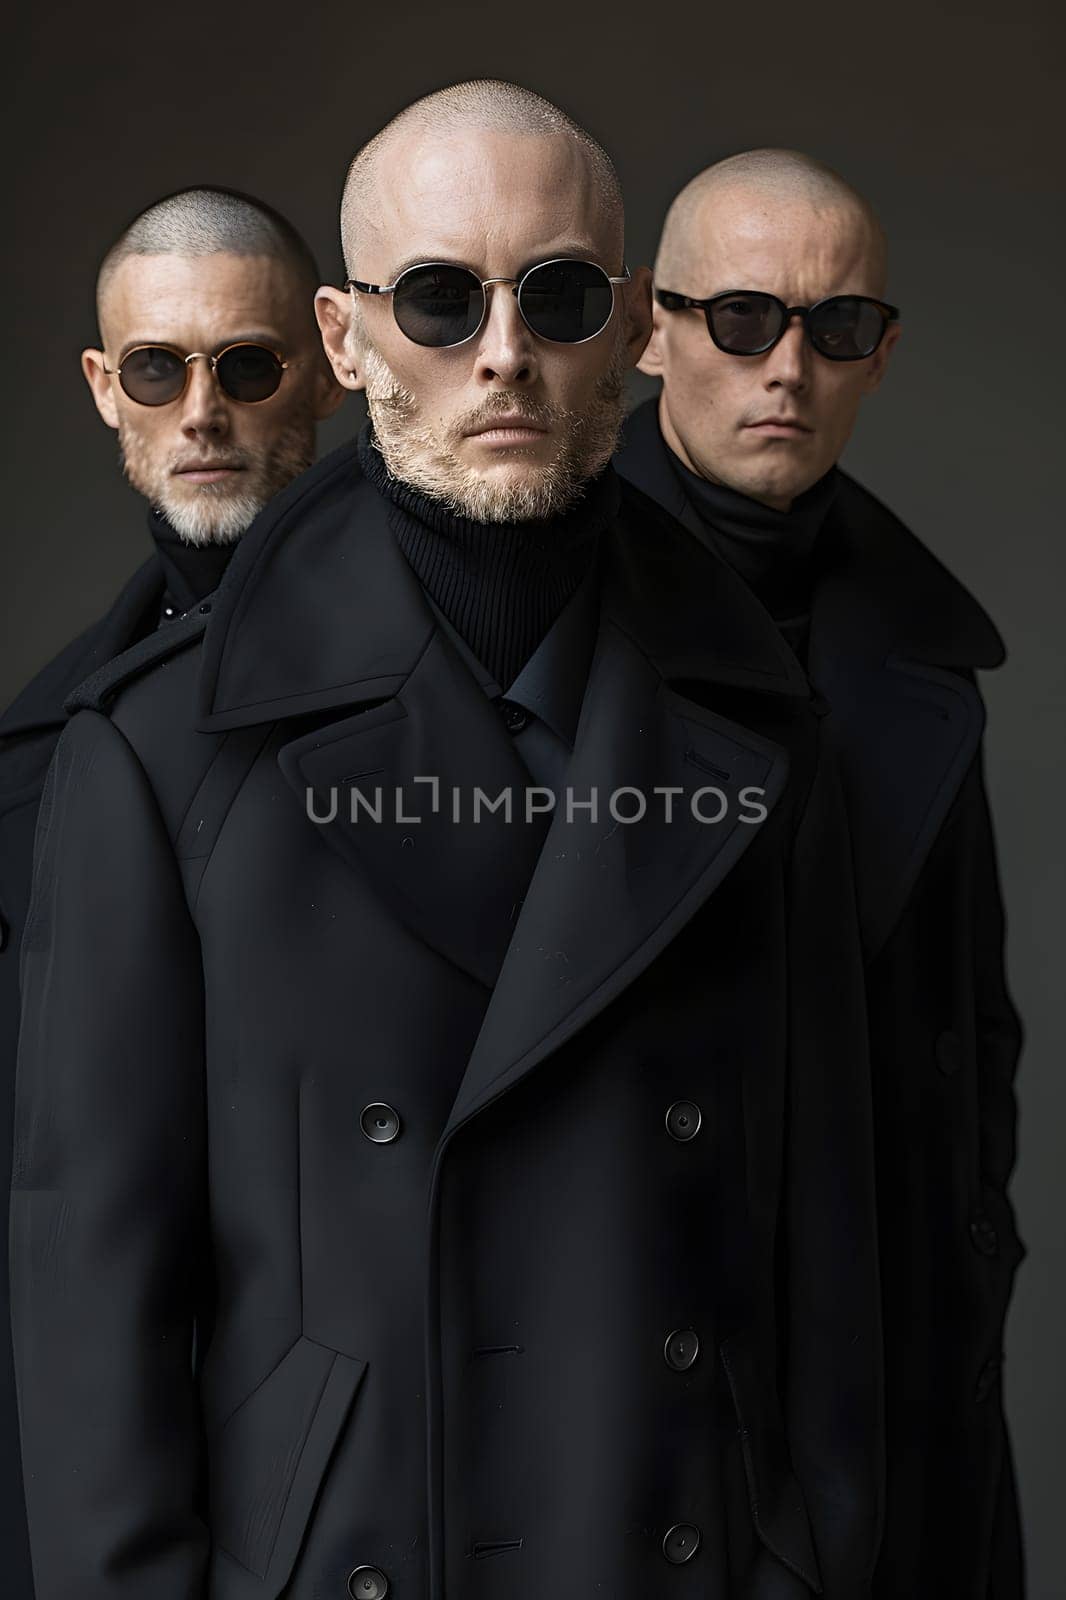 Three bald men in black overcoats and sunglasses are standing together, showcasing a united front in their vision care eyewear and stylish fashion design